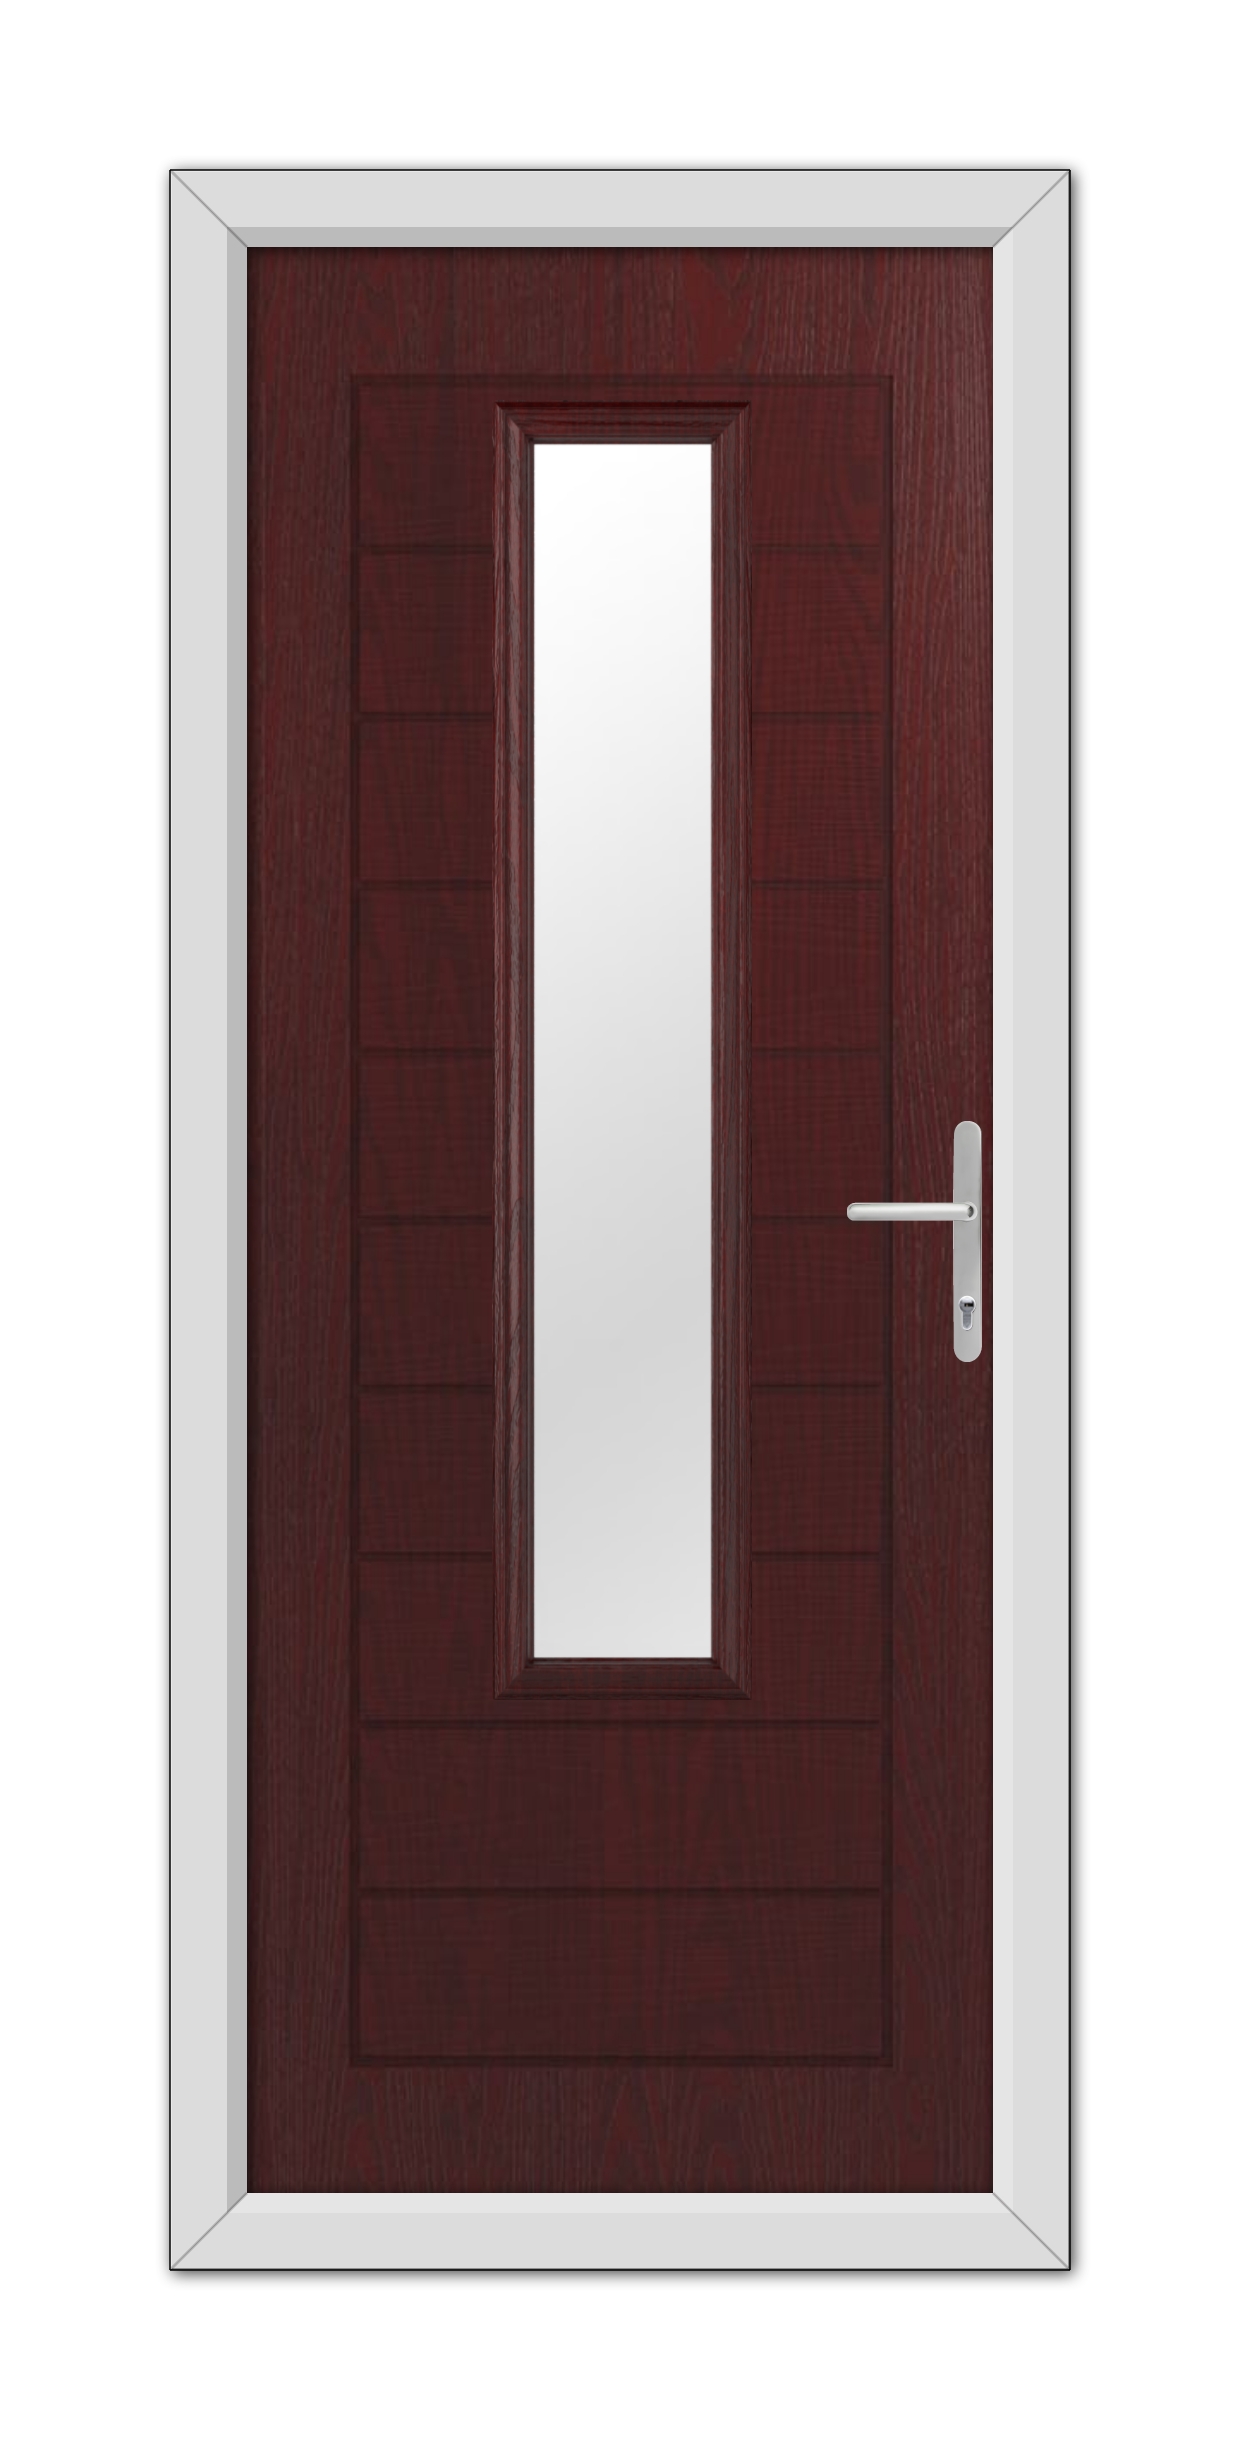 A modern Rosewood Bedford Composite Door 48mm Timber Core with a vertical glass panel and a white metal handle, set in a white frame.